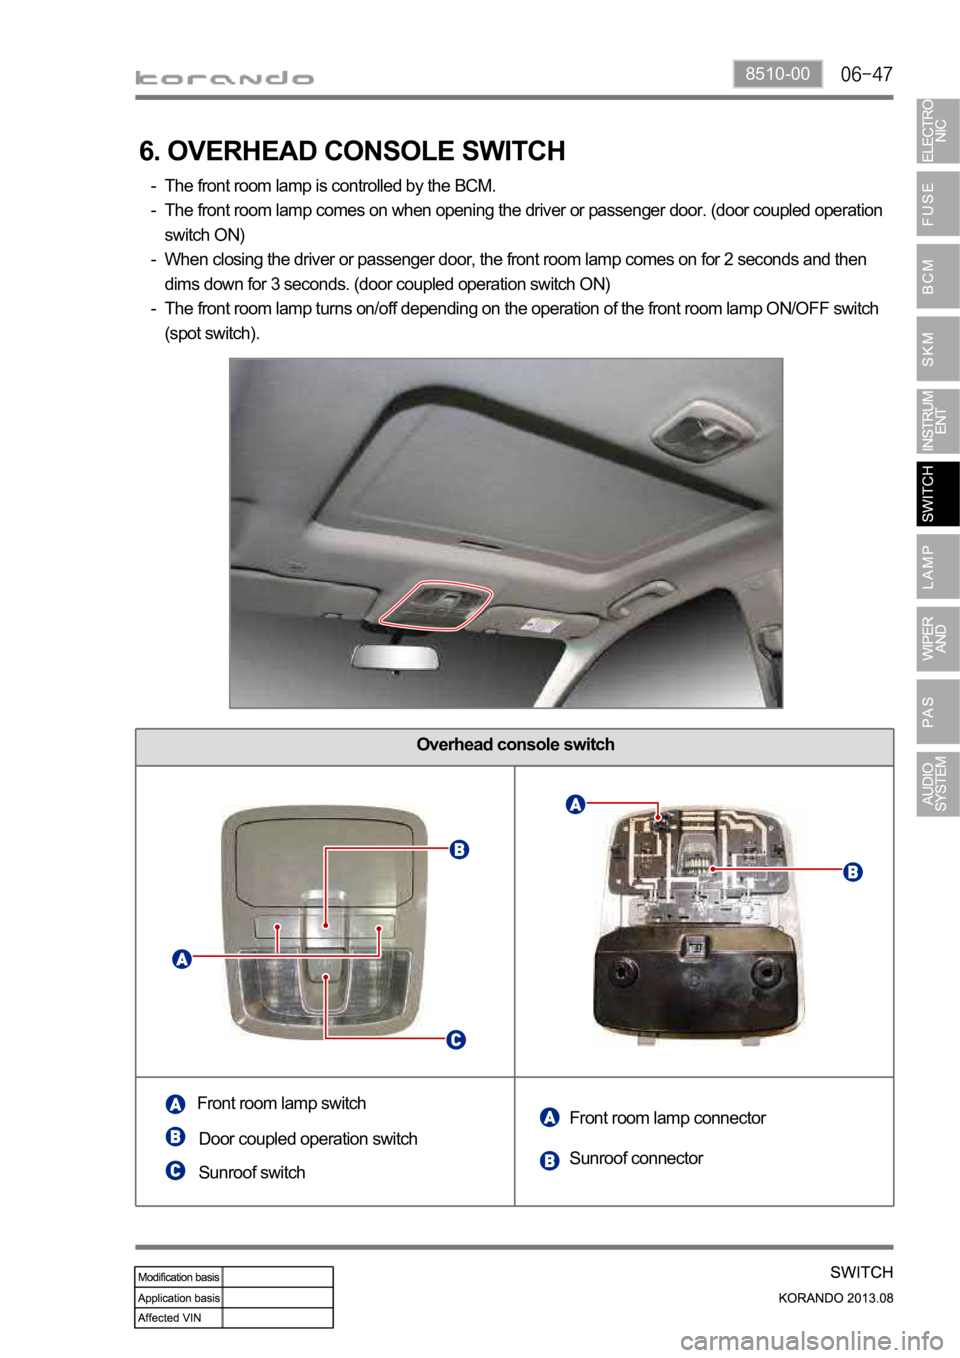 SSANGYONG KORANDO 2013  Service Manual 8510-00
Overhead console switch
6. OVERHEAD CONSOLE SWITCH
The front room lamp is controlled by the BCM.
The front room lamp comes on when opening the driver or passenger door. (door coupled operation